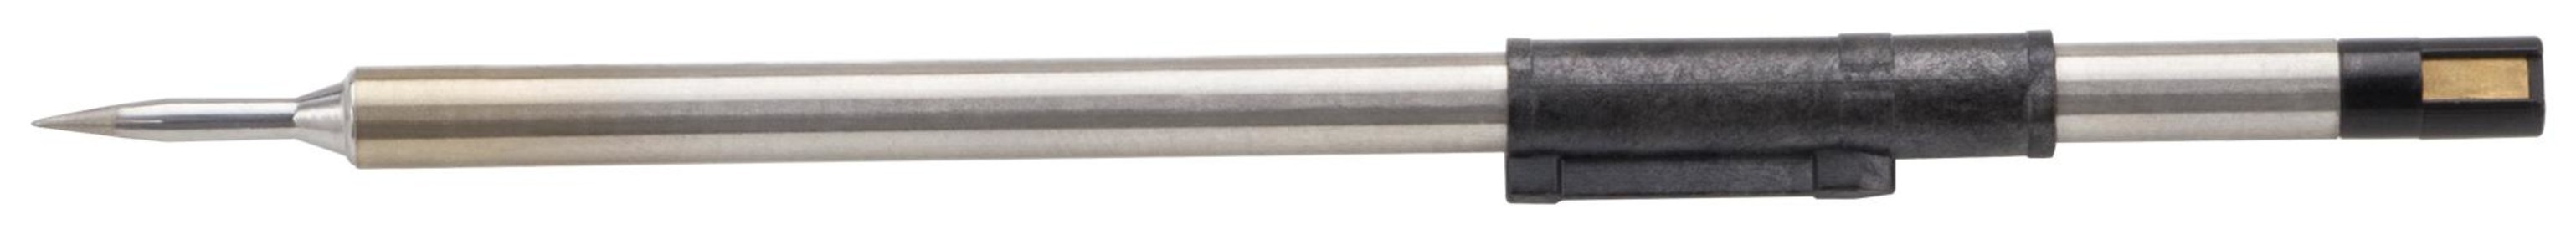 Pace 1124-0004-P1 Tip Cartridge, Conical, Sharp, 1/64